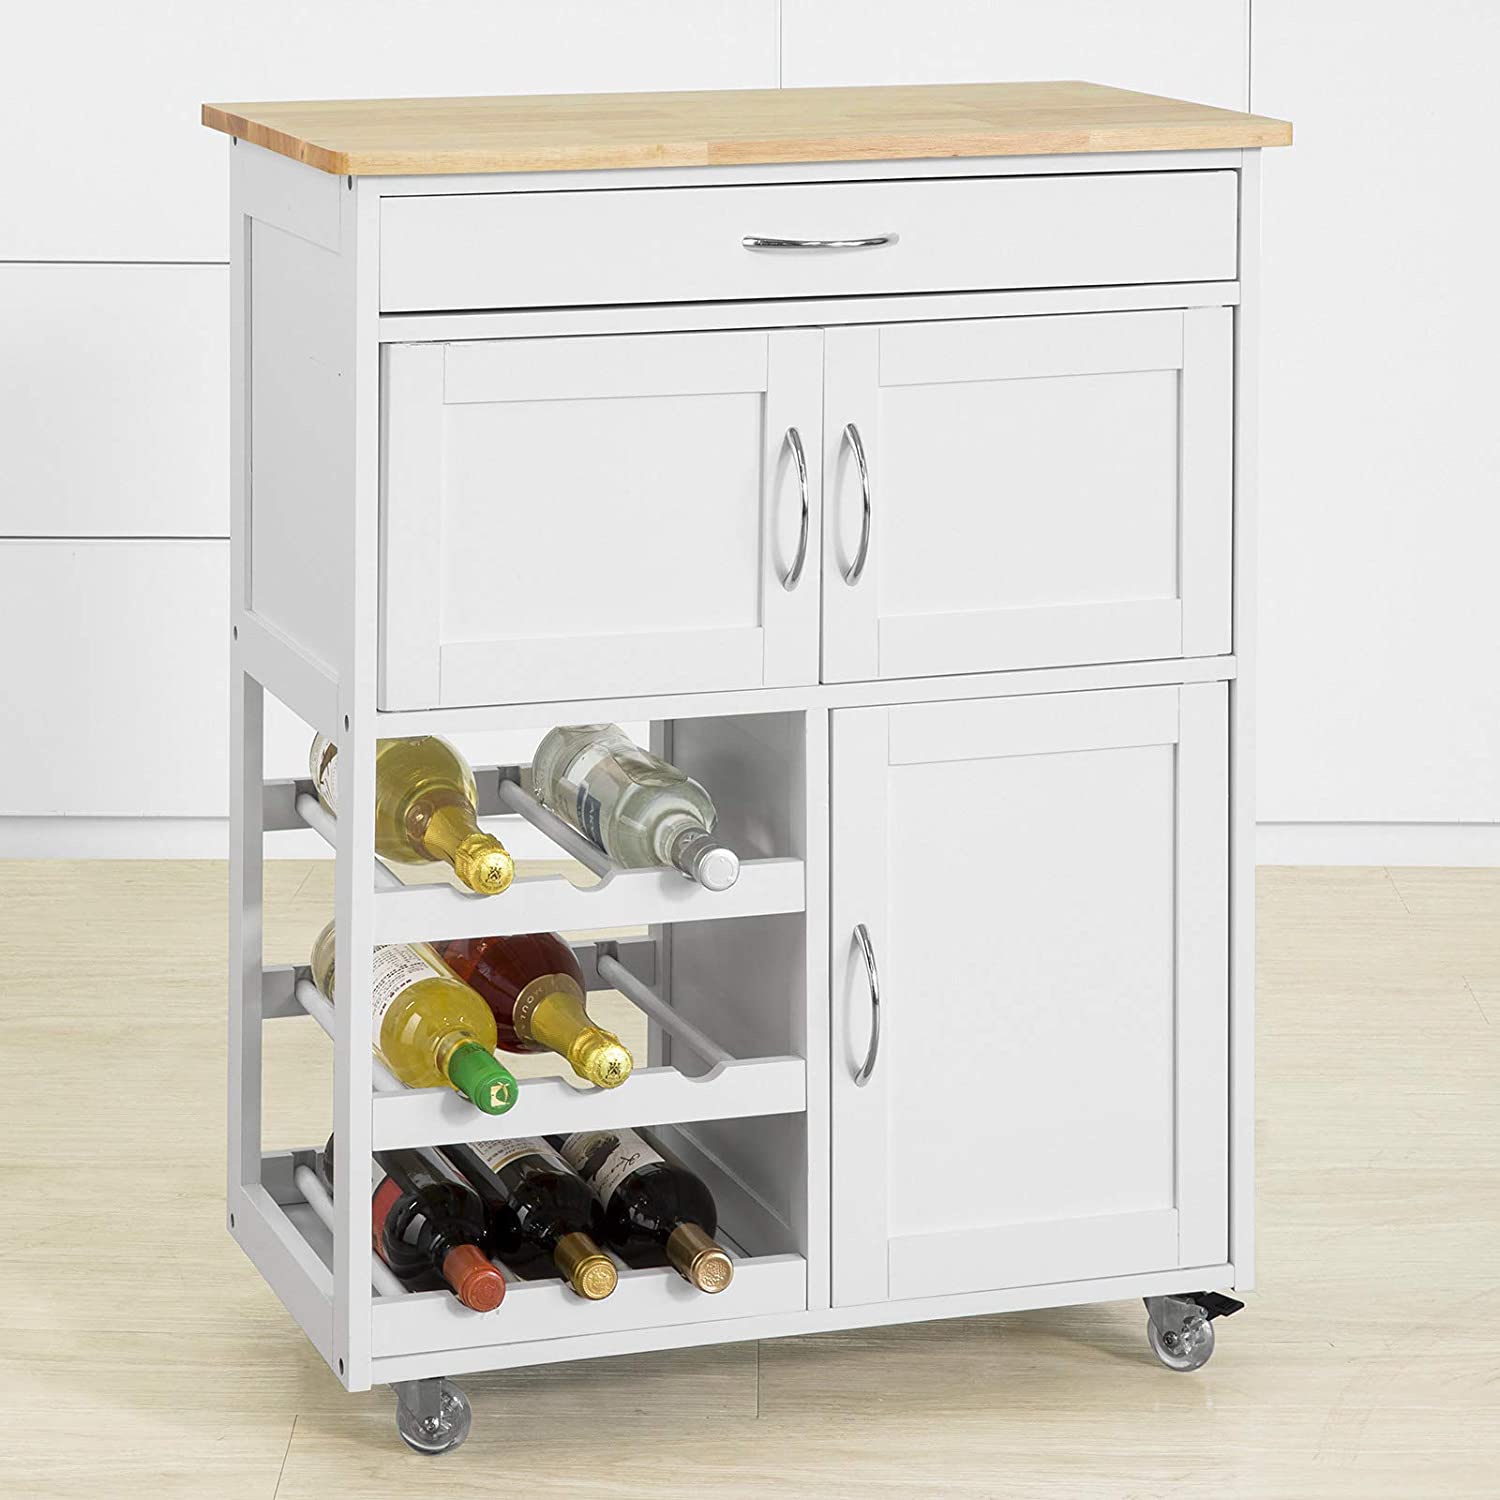 Kitchen Trolley with Wine Racks, Portable Workbench and Serving Cart for Bar or Dining - image2